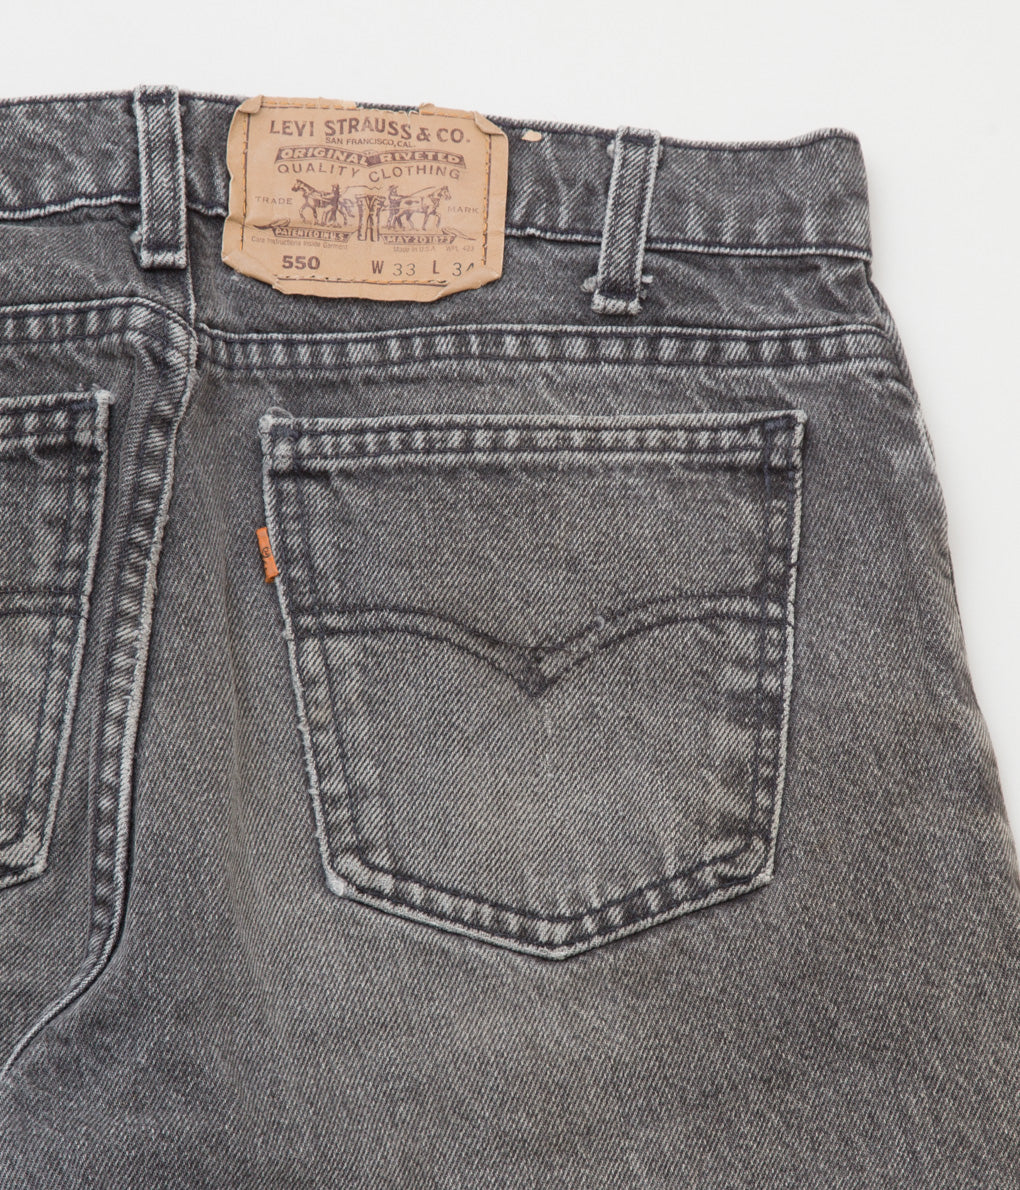 VINTAGE "90's LEVI'S 550 BLACK MADE IN USA"(W33/L32)